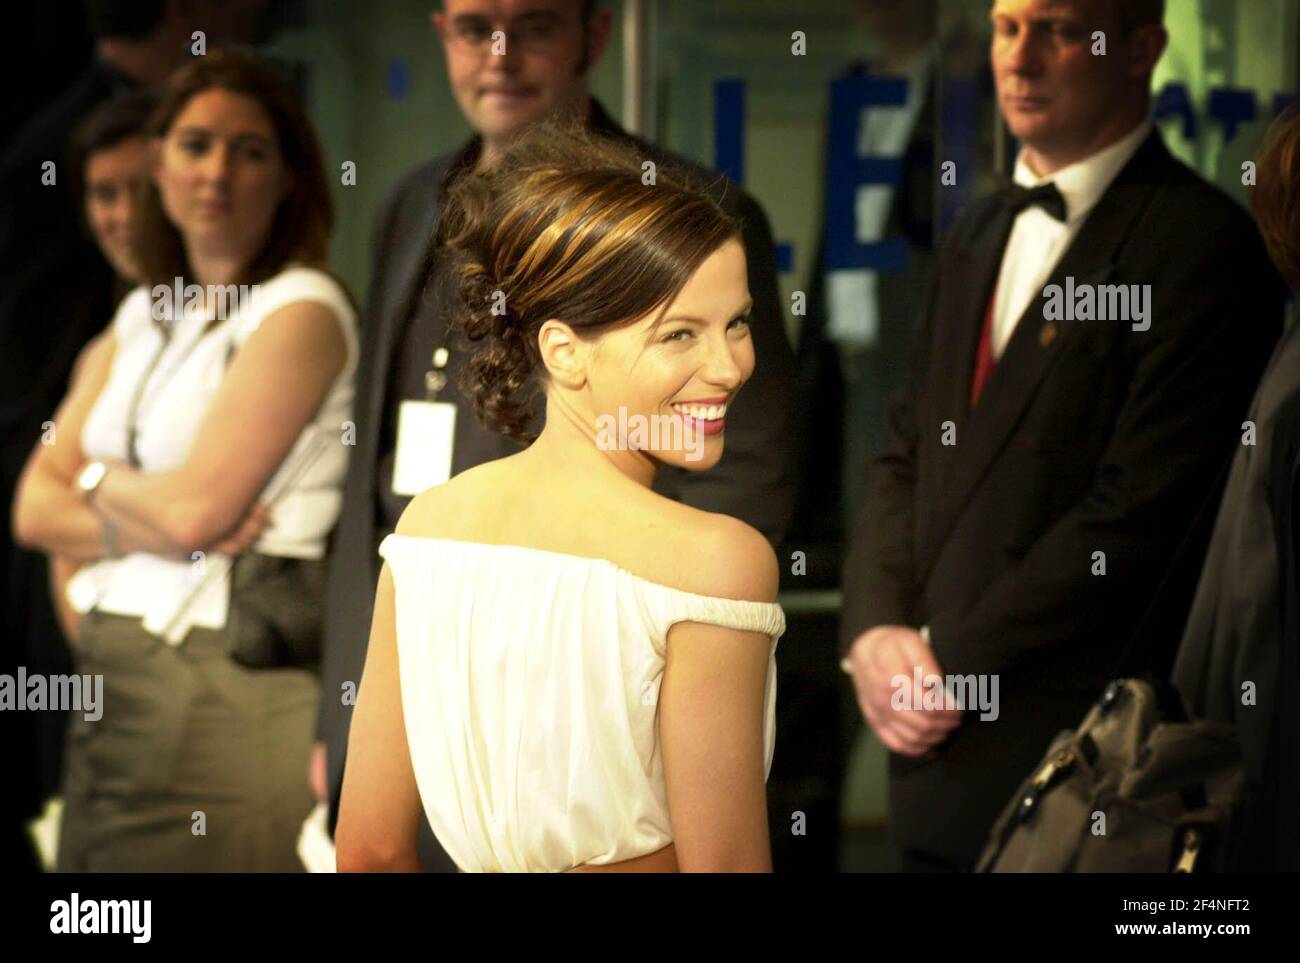 BRITISH ACTRESS KATE BECKINSALE ARRIVING AT THE BRITISH PREMIERE OF 'PEARL HARBOUR' Stock Photo